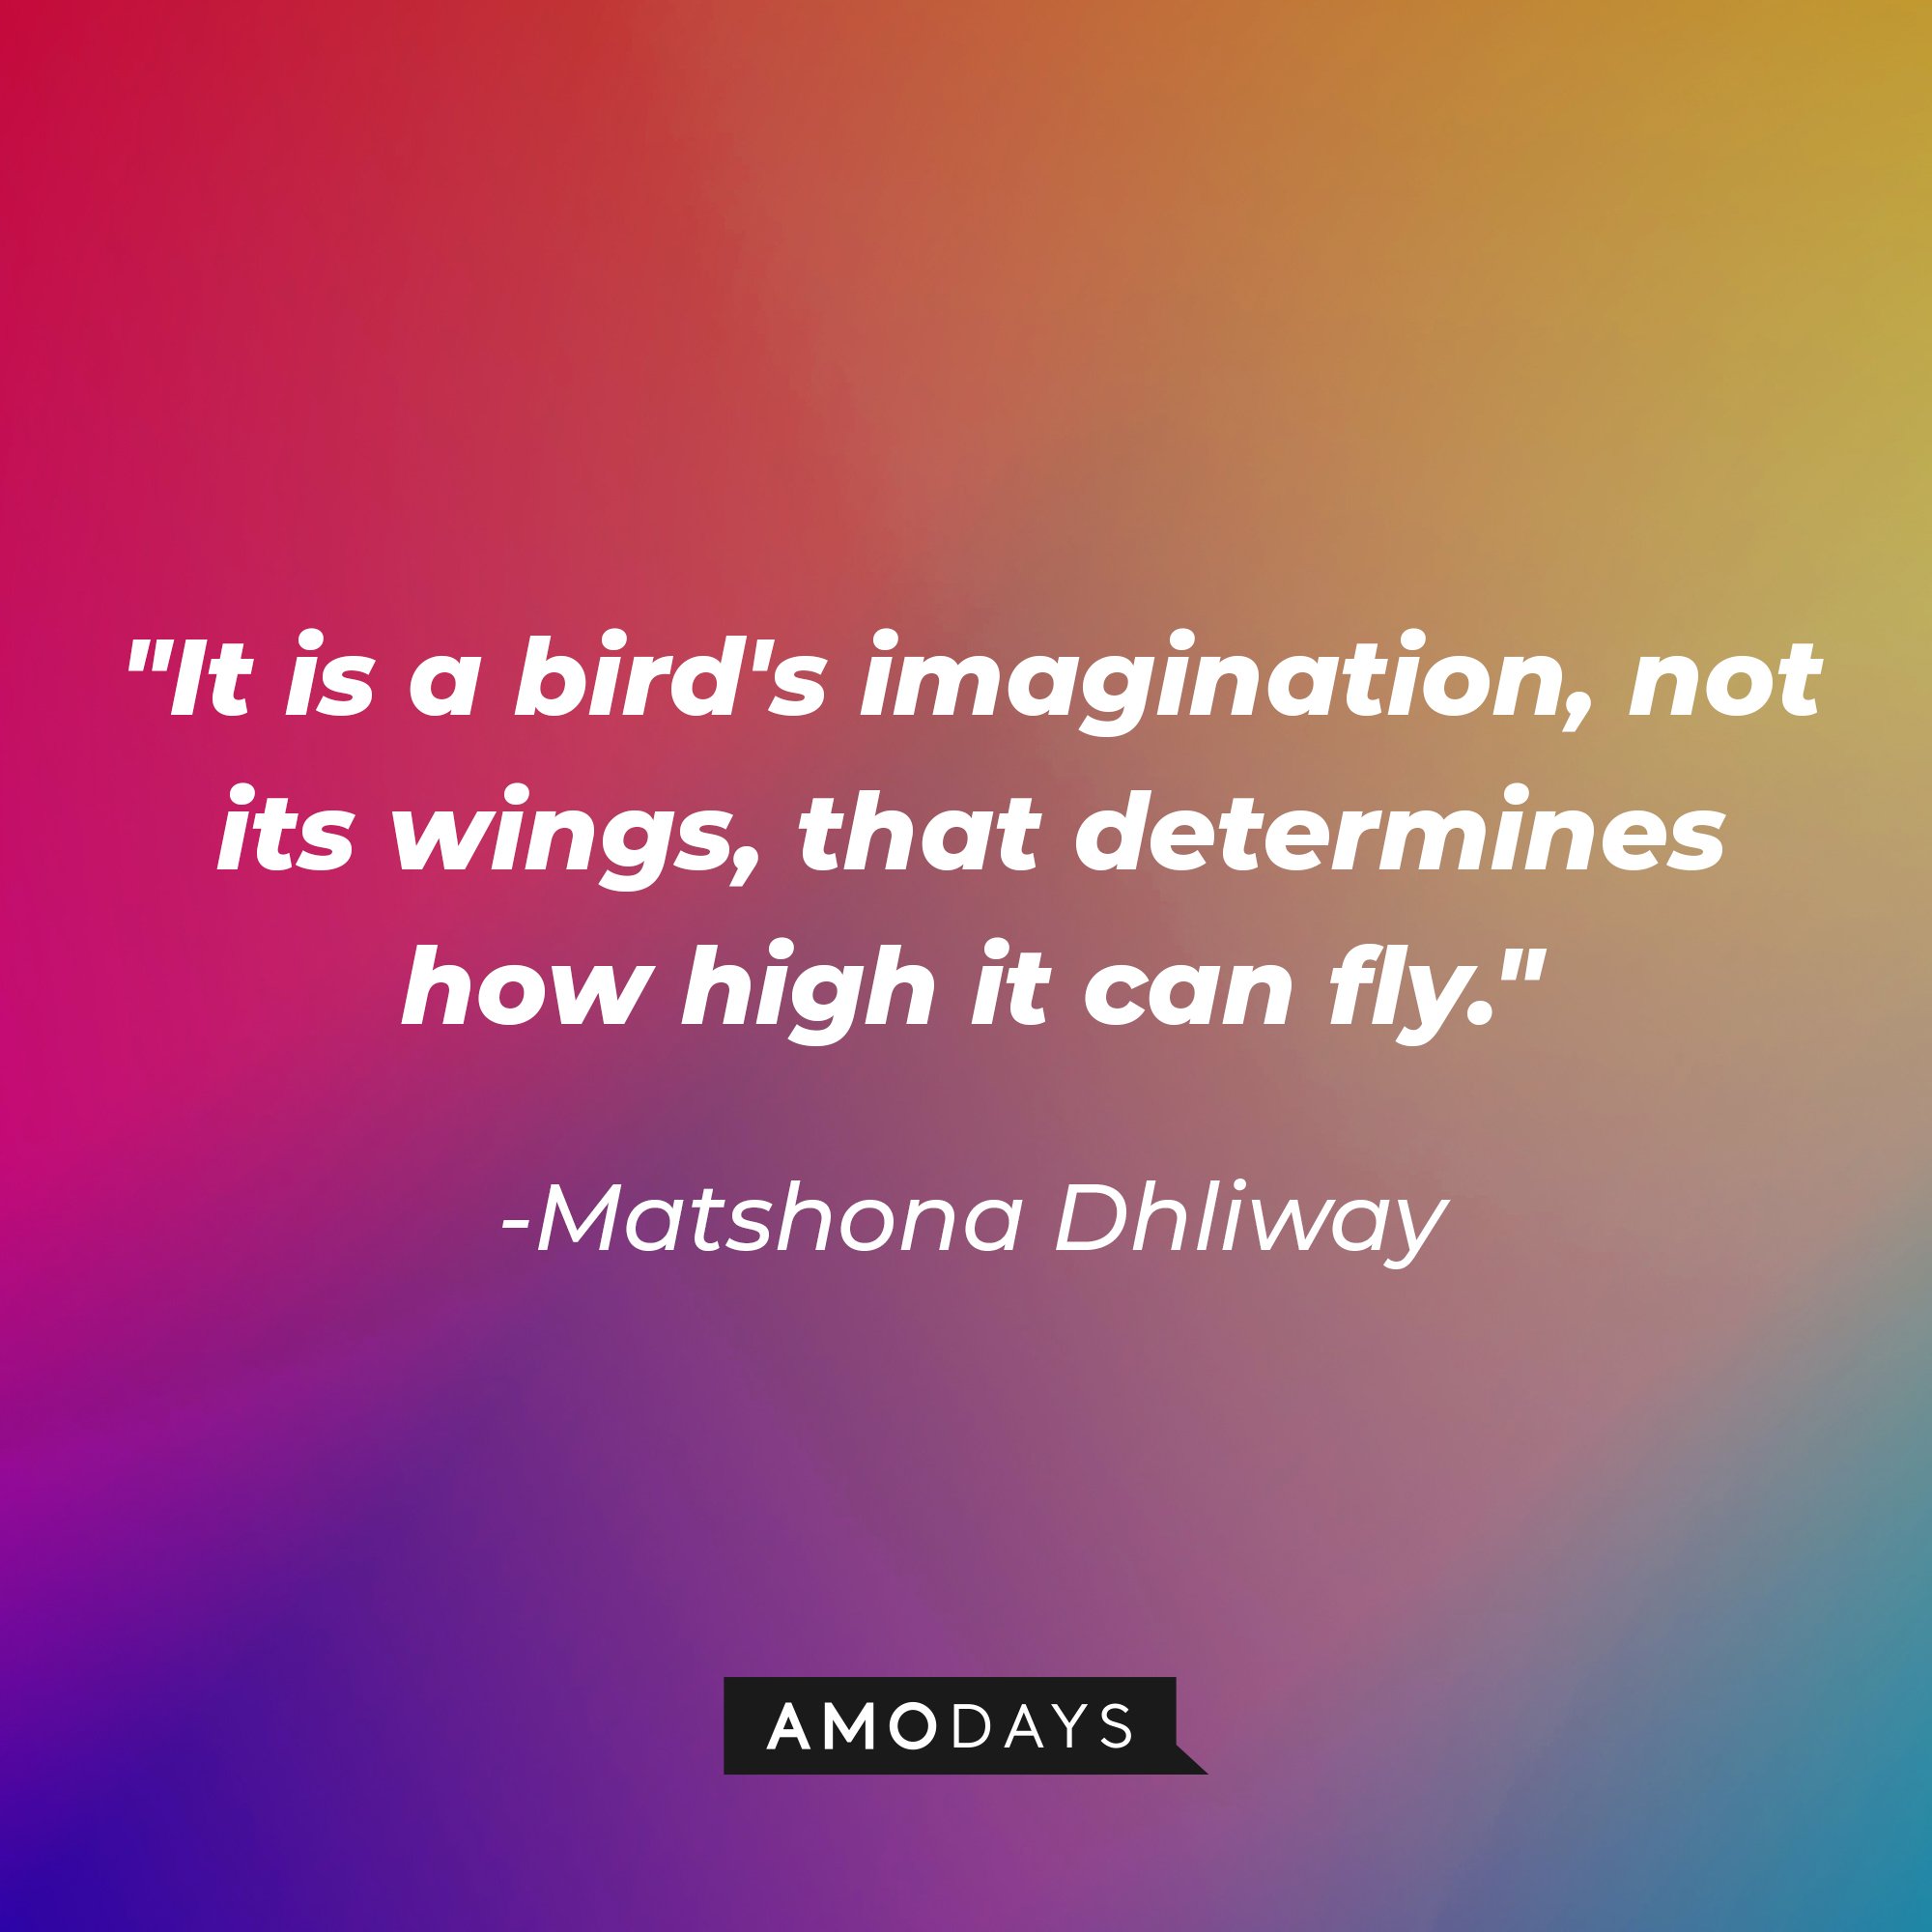  Matshona Dhliway’s quote: "It is a bird's imagination, not its wings, that determines how high it can fly." | Image: AmoDays